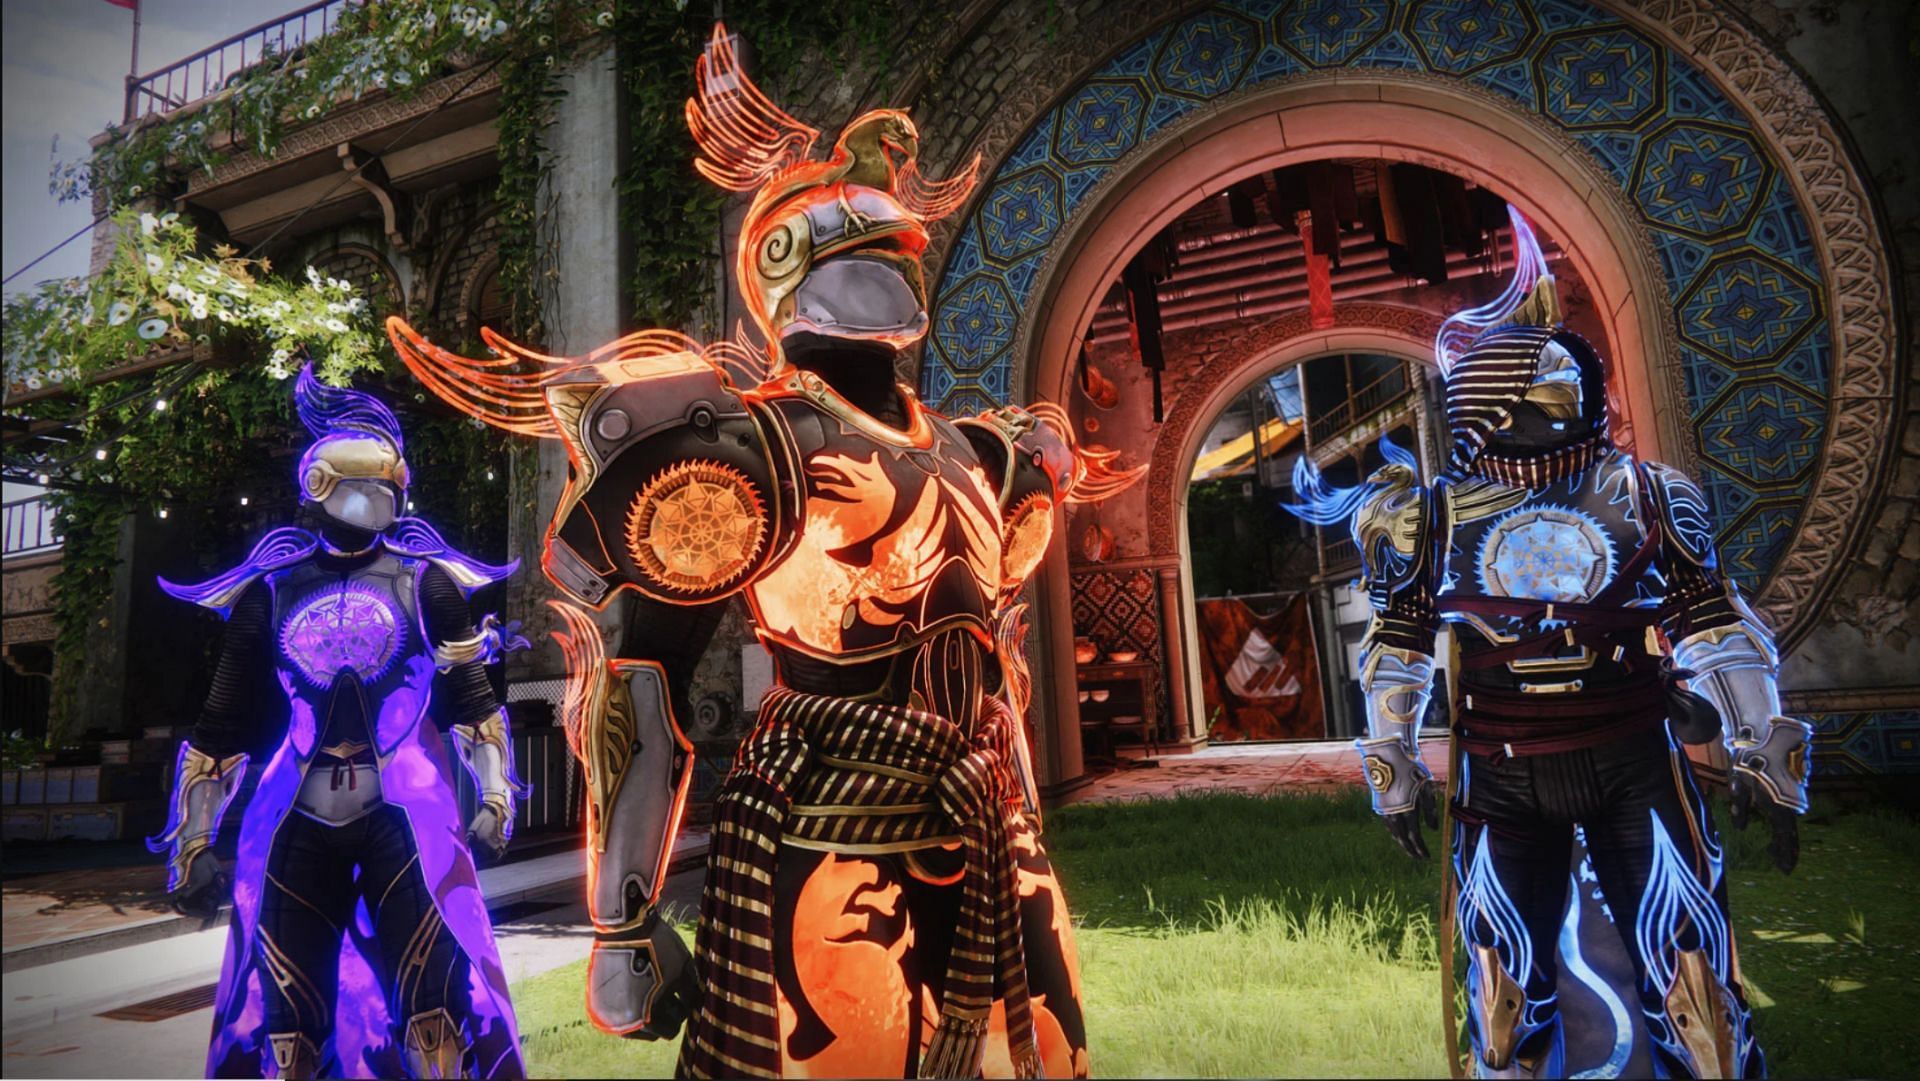 Destiny 2 players can use an exploit to gain high-stat armor on their alternate accounts (Image via Bungie)